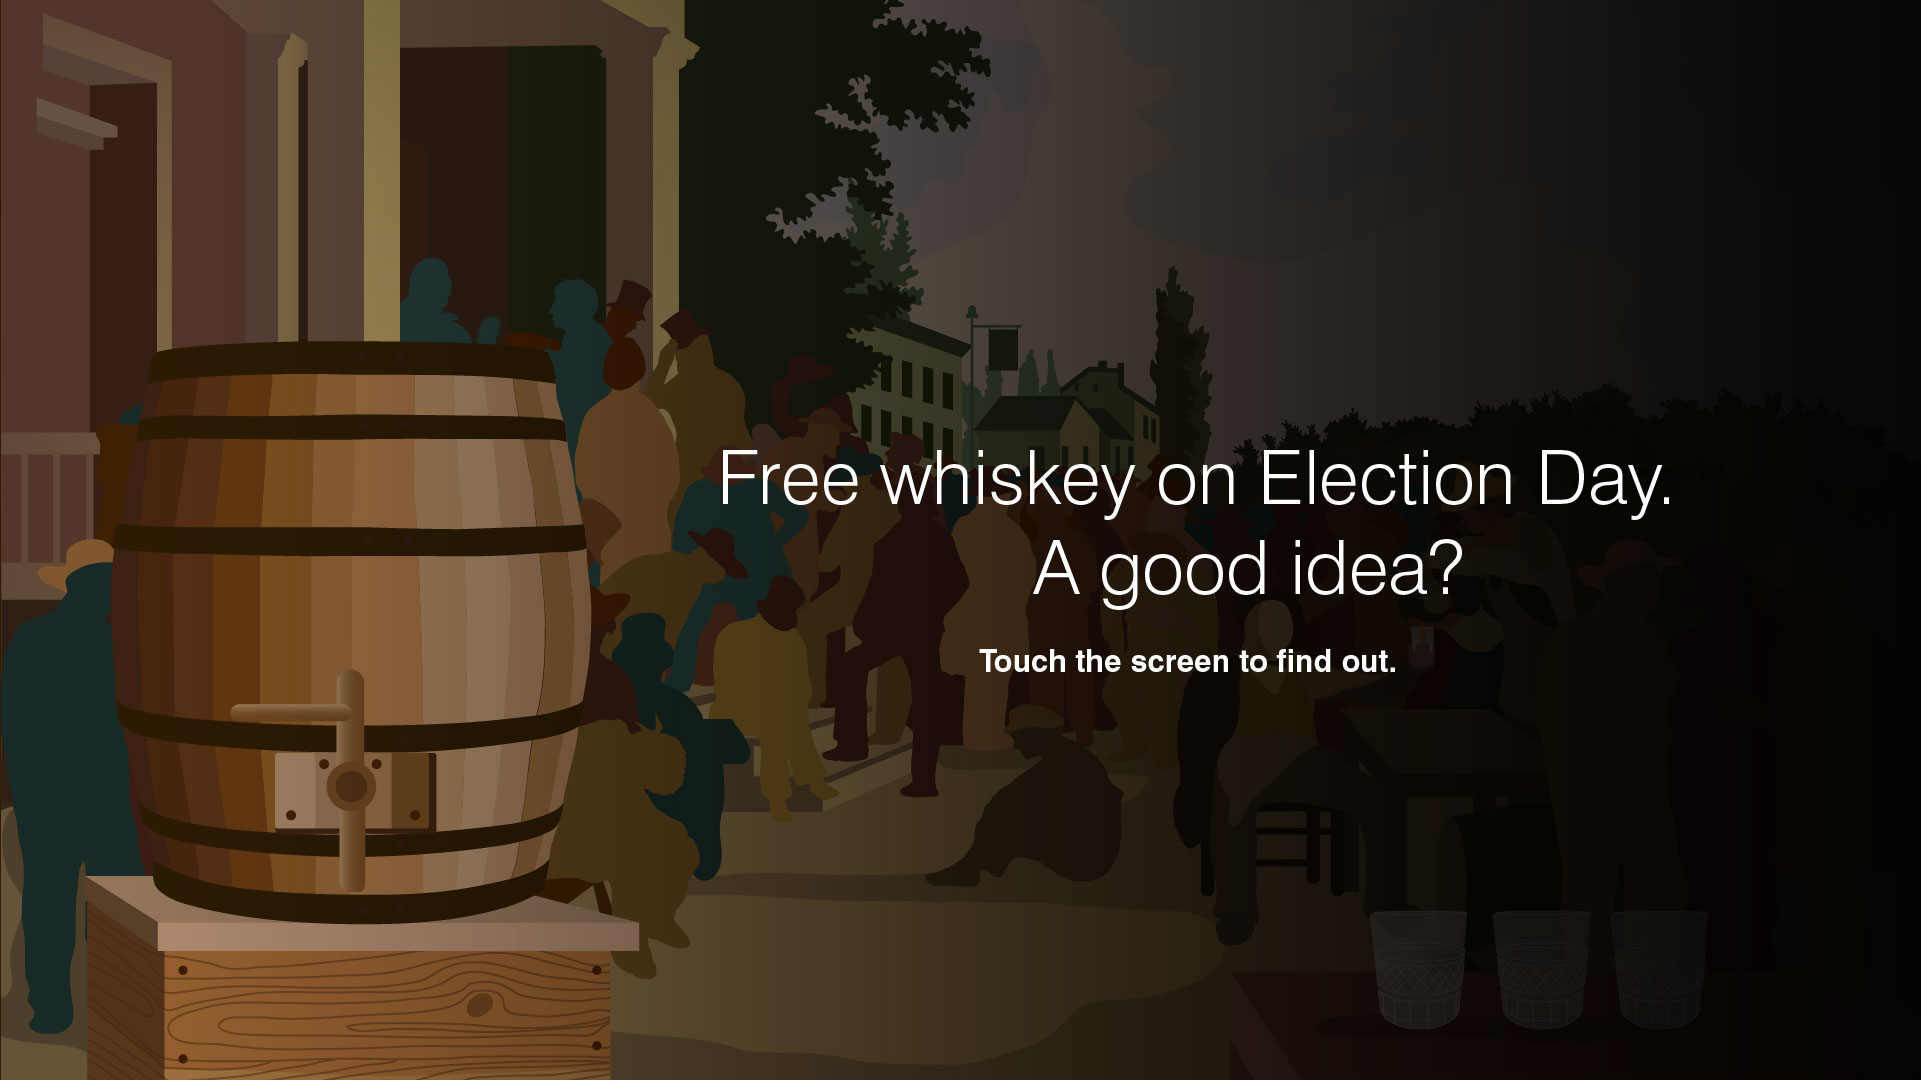 Free whiskey on election day. A good idea? Touch the screen to find out.